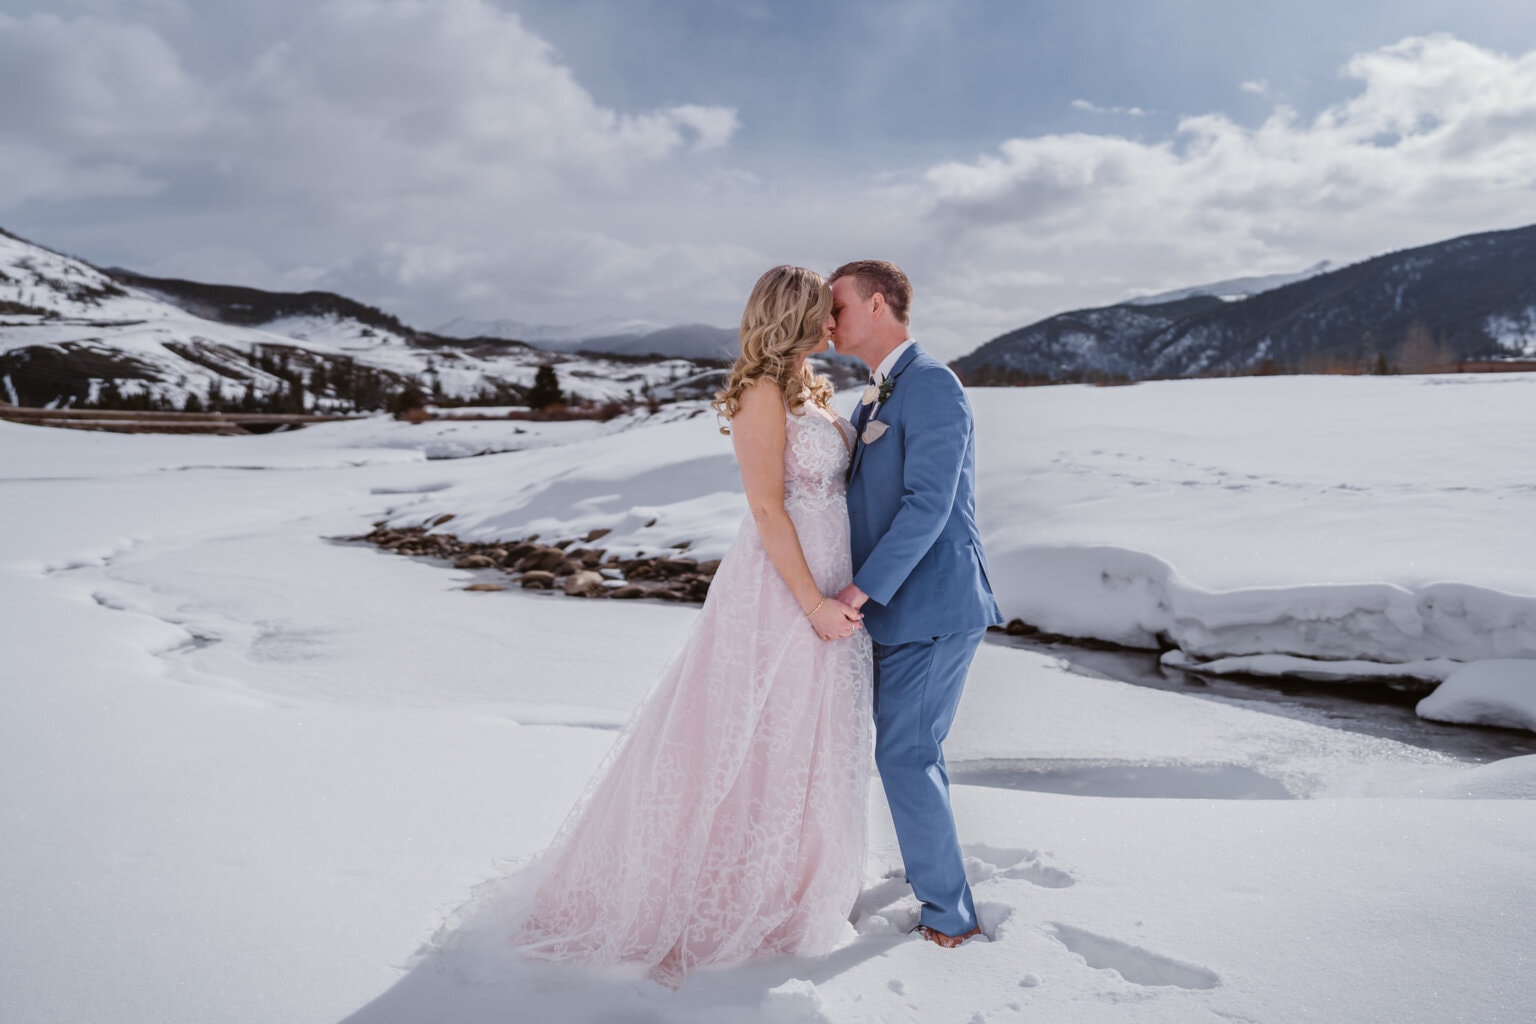 How to Plan a Perfectly Snowy Winter Elopement